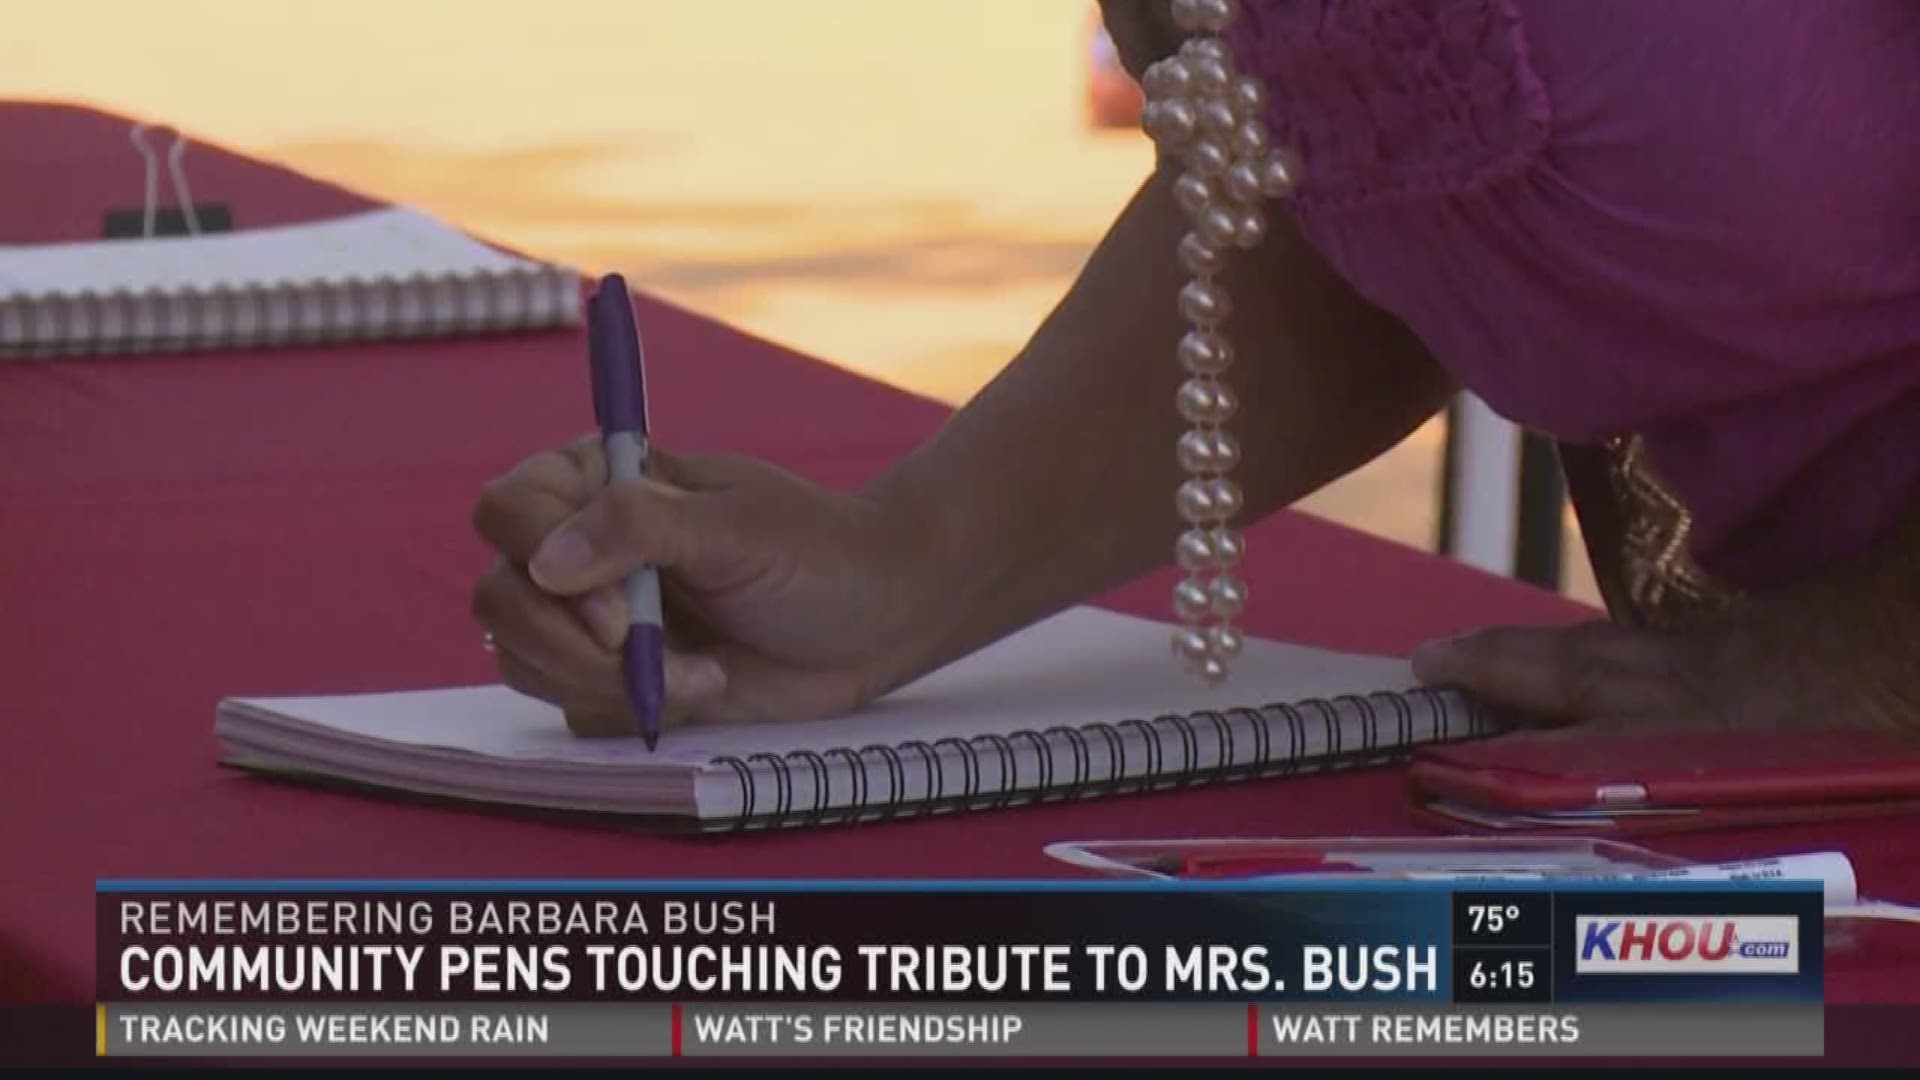 Houstonians shared their memories and wrote messages for Barbara Bush and her family that will become part of the public library's historical archives.